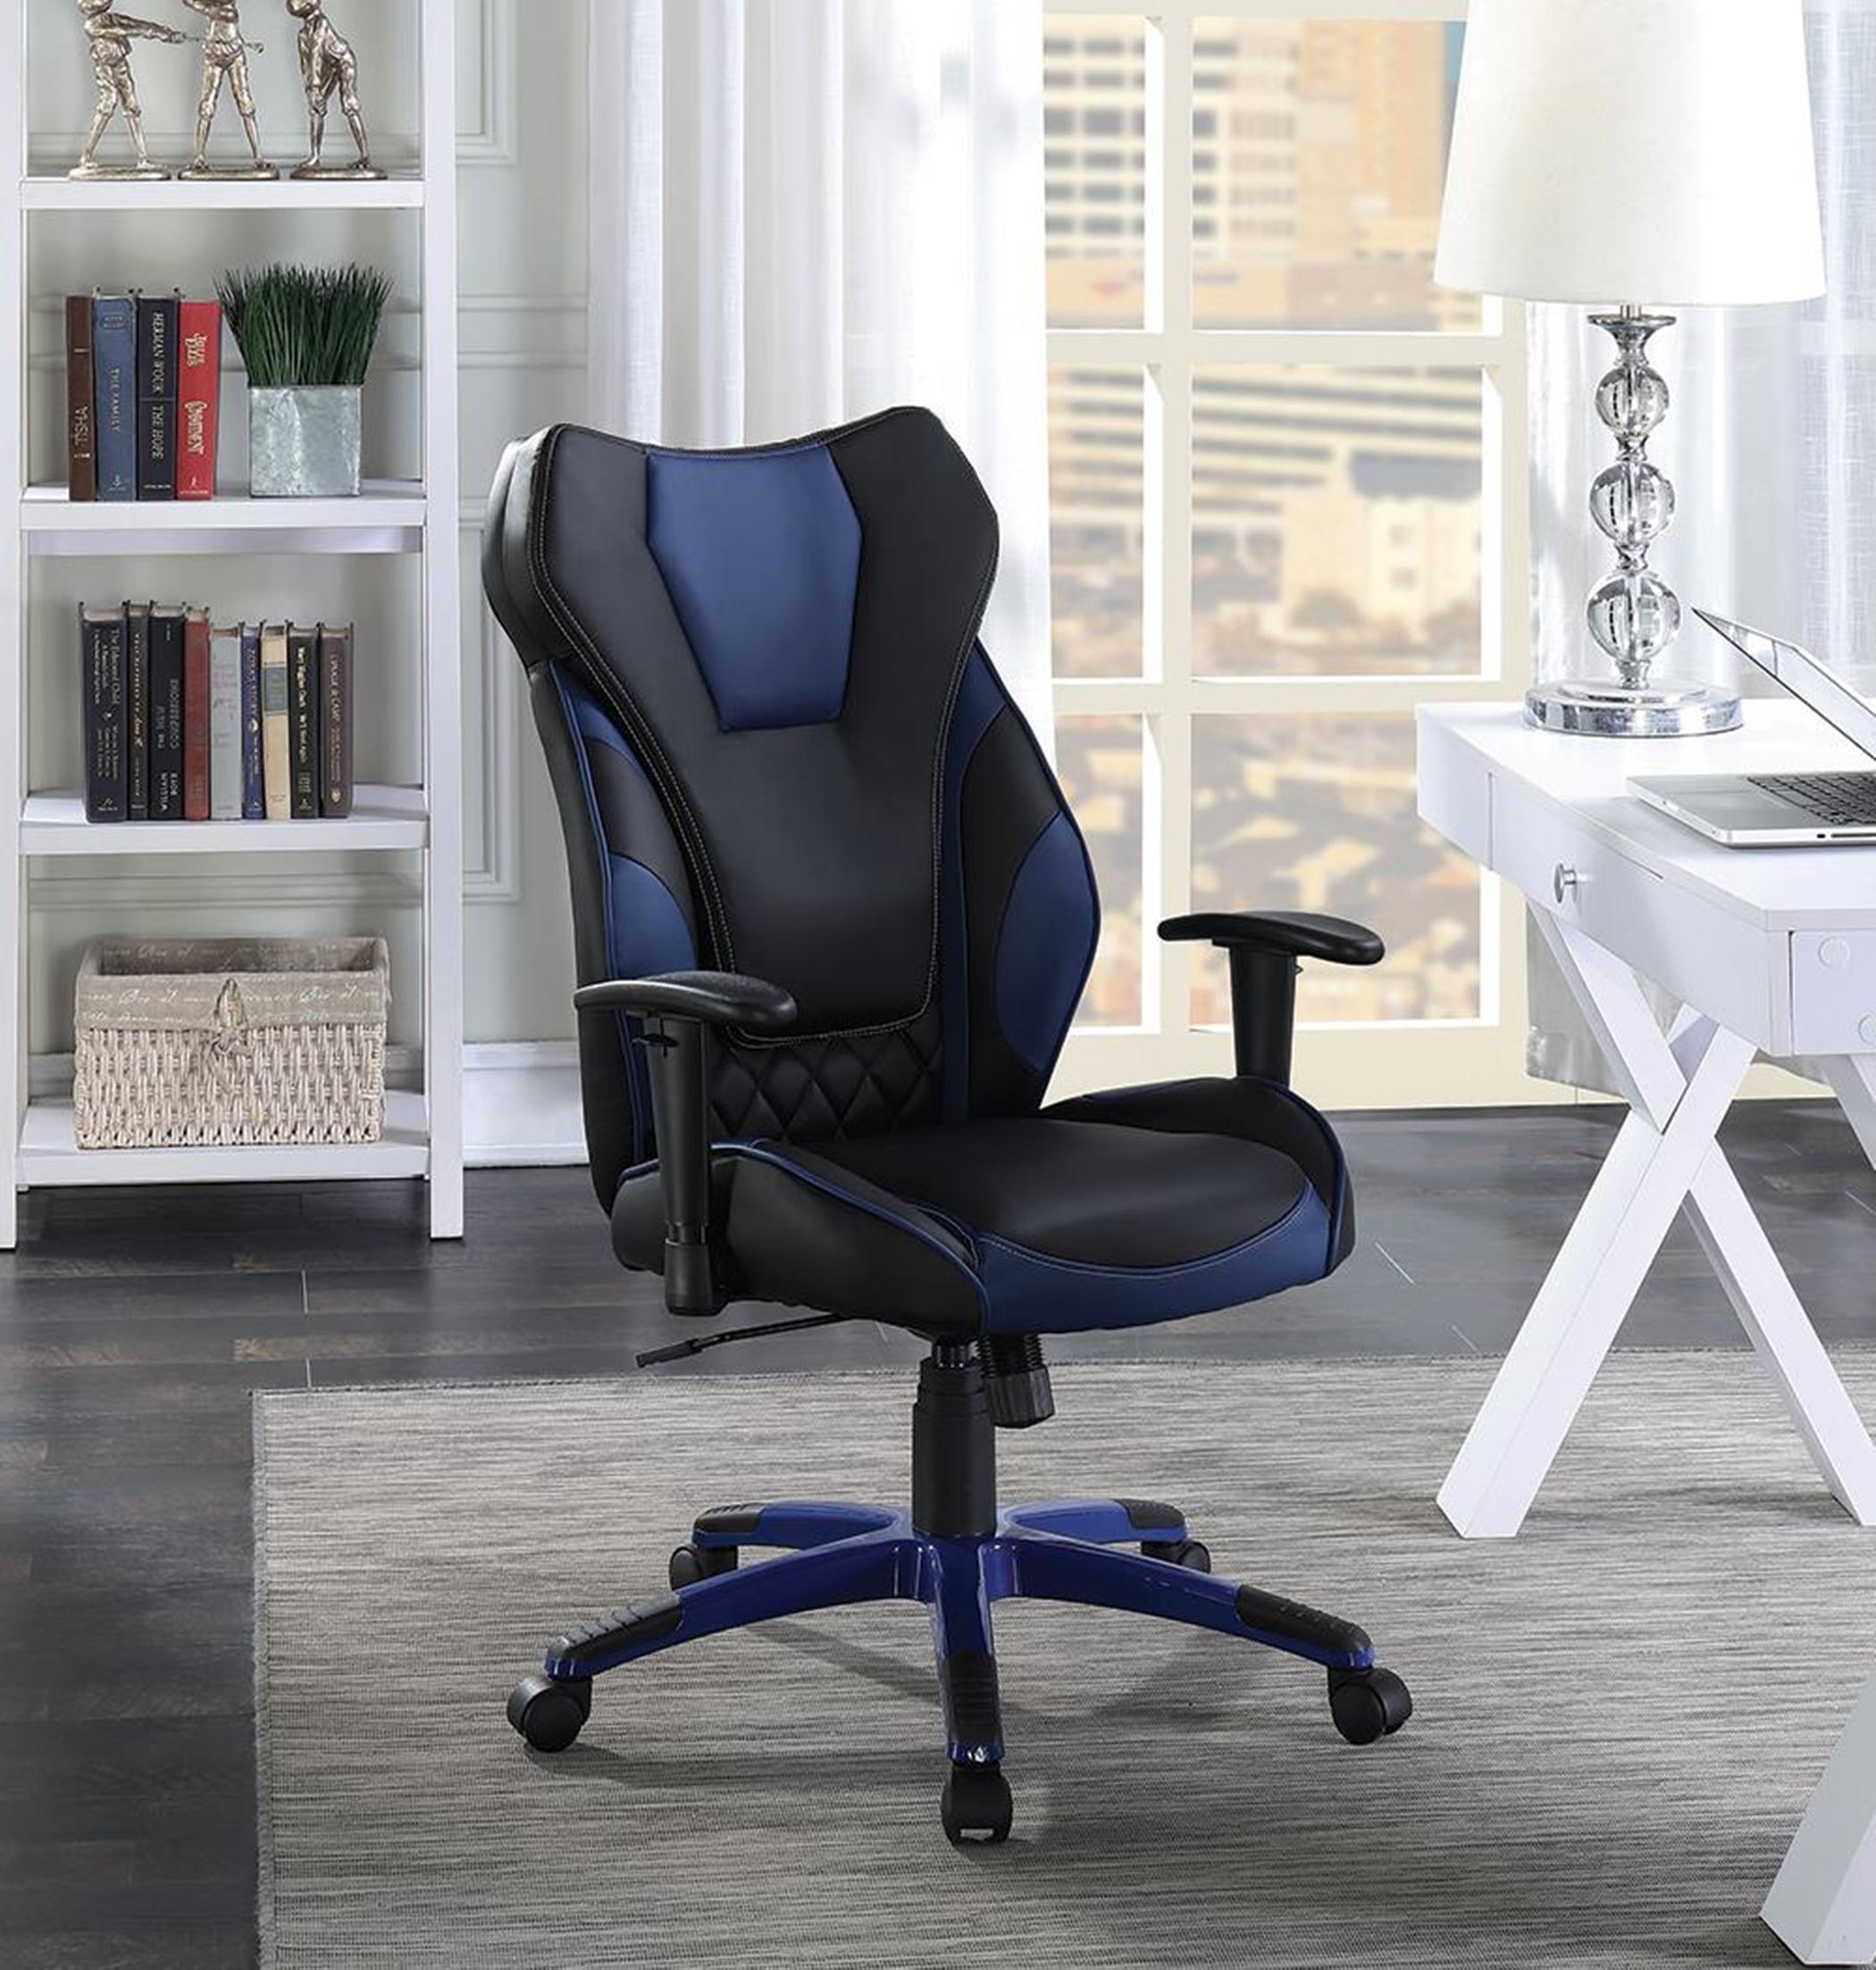 Contemporary Black/Blue High-Back Office Chair